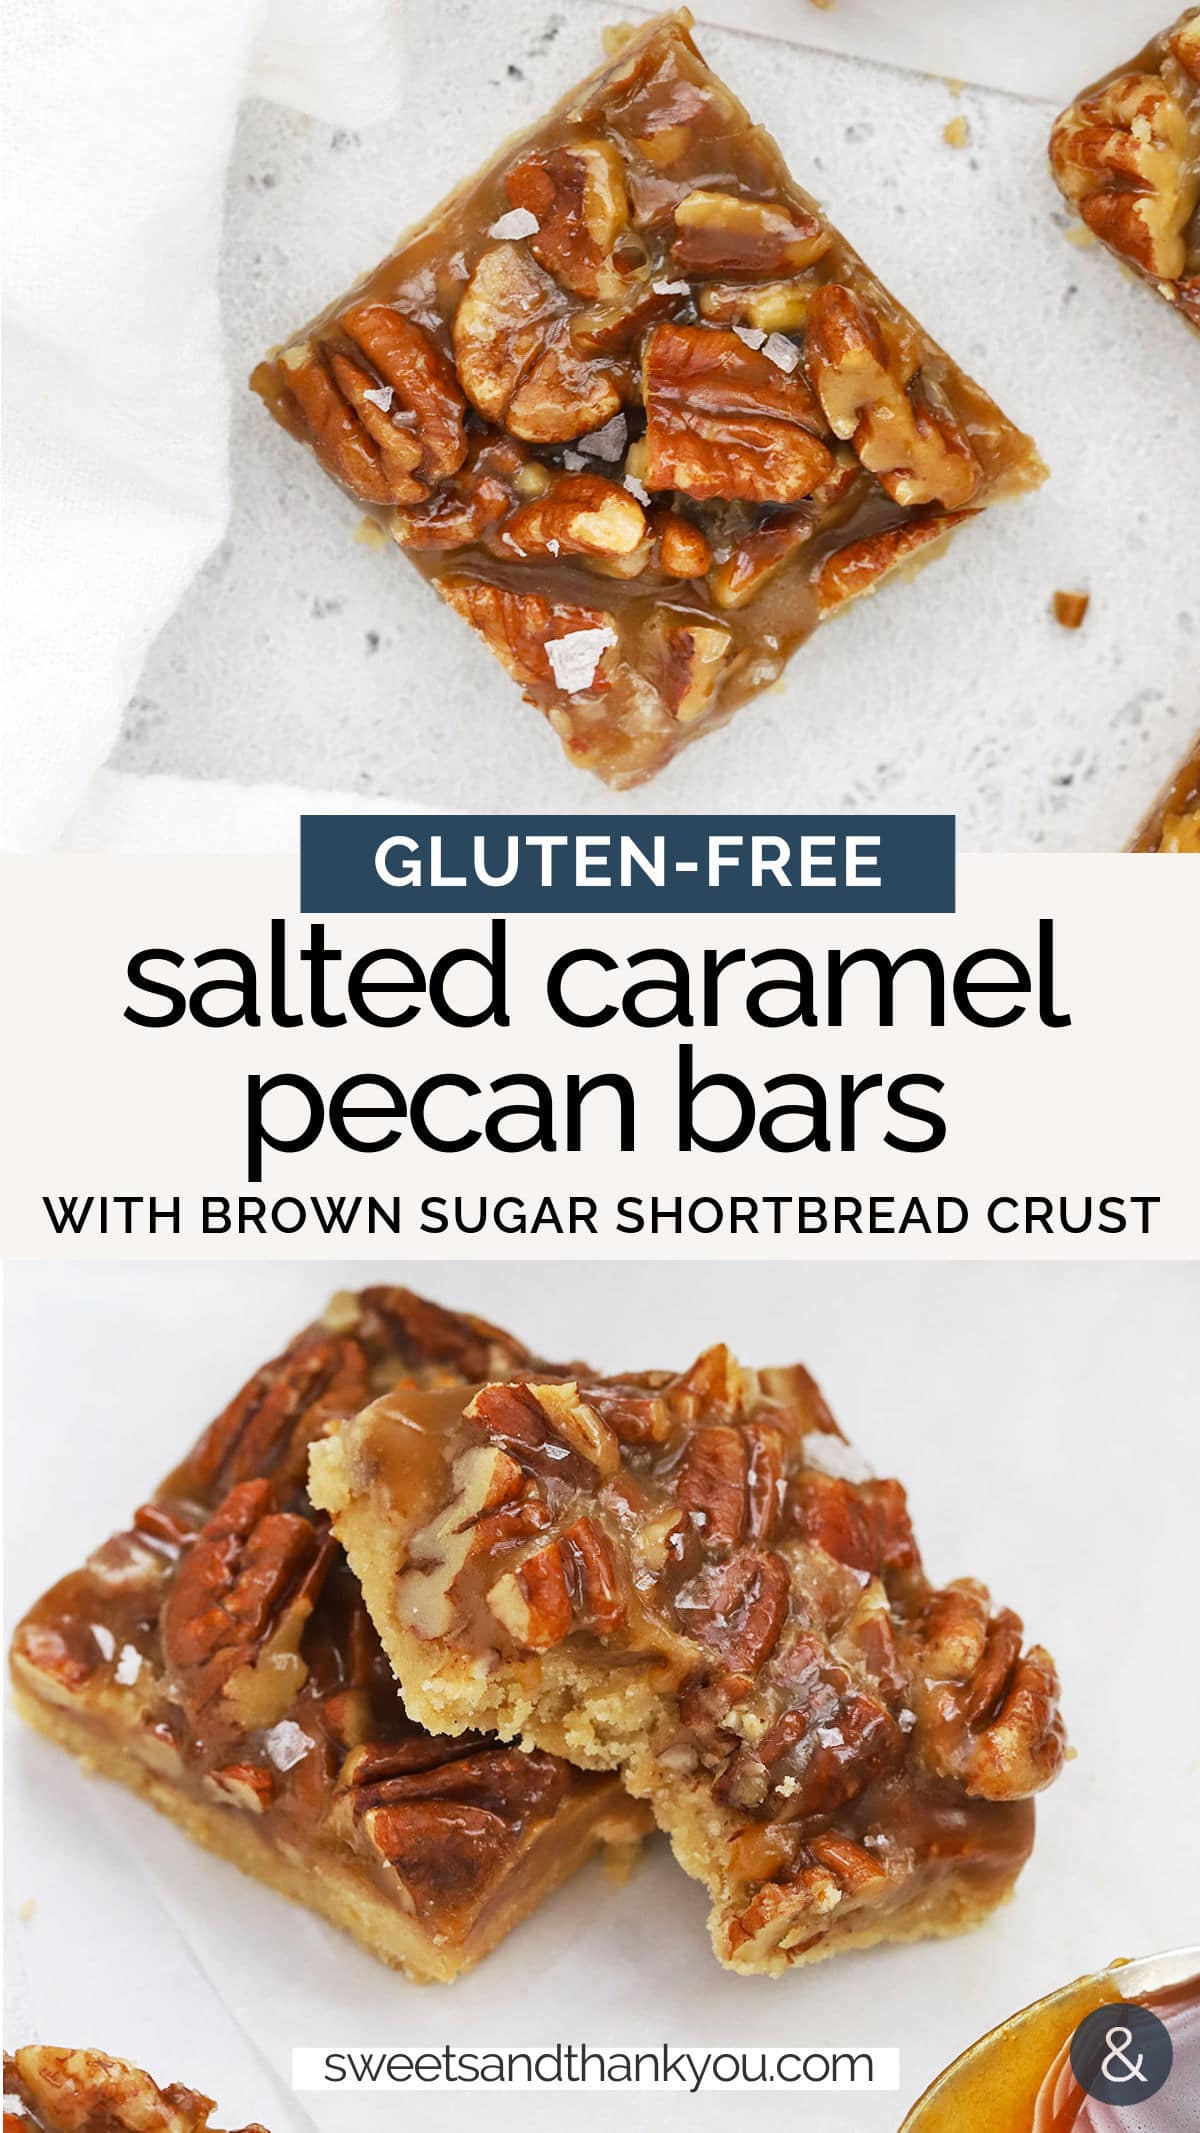 Gluten-Free Salted Caramel Pecan Bars - With their brown sugar shortbread crust and salted caramel pecan filling, these yummy gluten-free pecan pie bars are as delicious as they are gorgeous. // Gluten Free Pecan Bars // Pecan bars without corn syrup // pecan bars no corn syrup // pecan pie bars recipe // thanksgiving dessert // gluten free dessert // gluten free baking // gluten free pecan pie